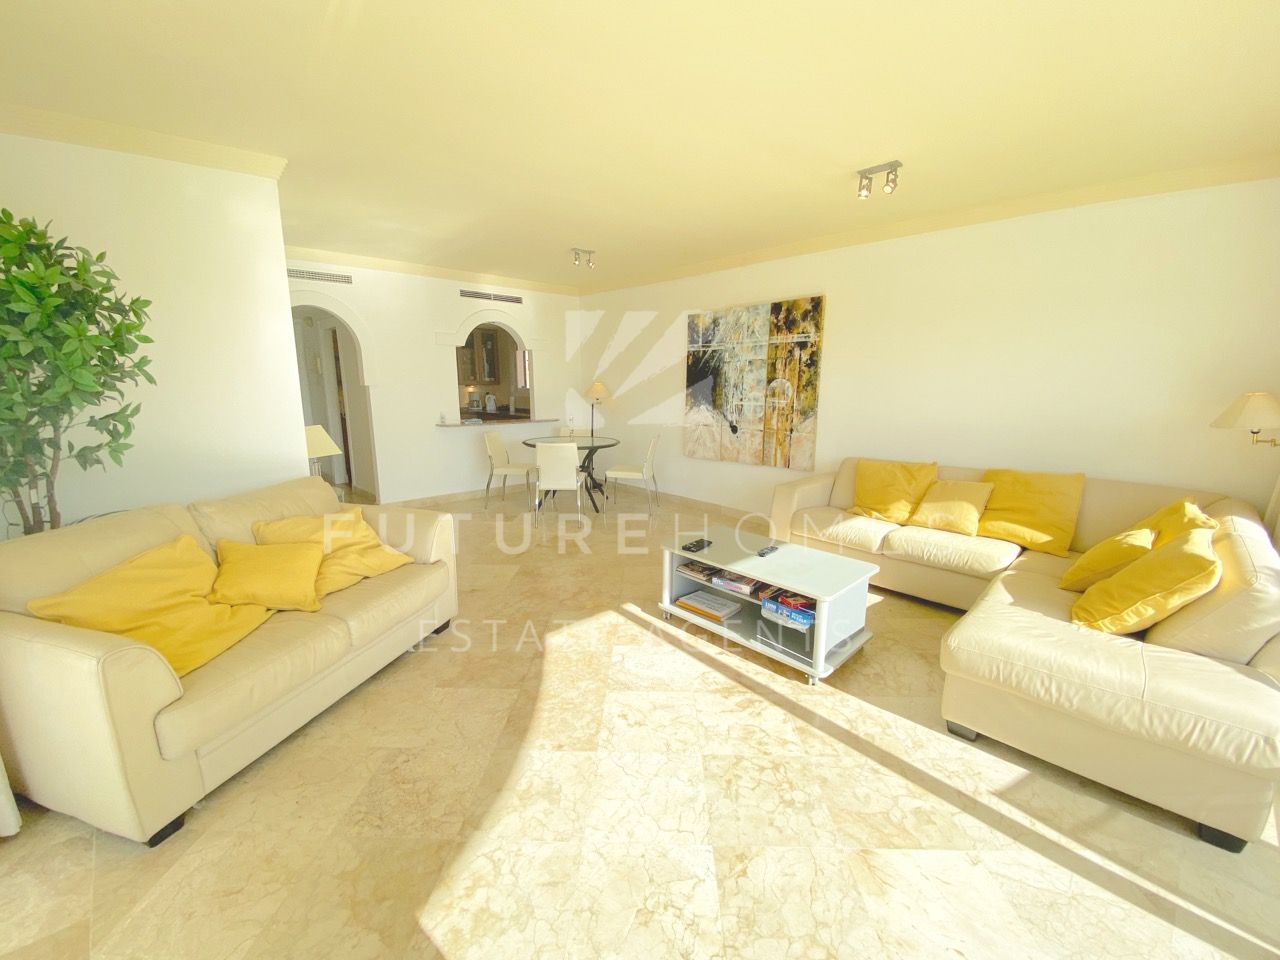 Apartment for sale within the beautiful frontline community of Sinfonia del Mar, Estepona